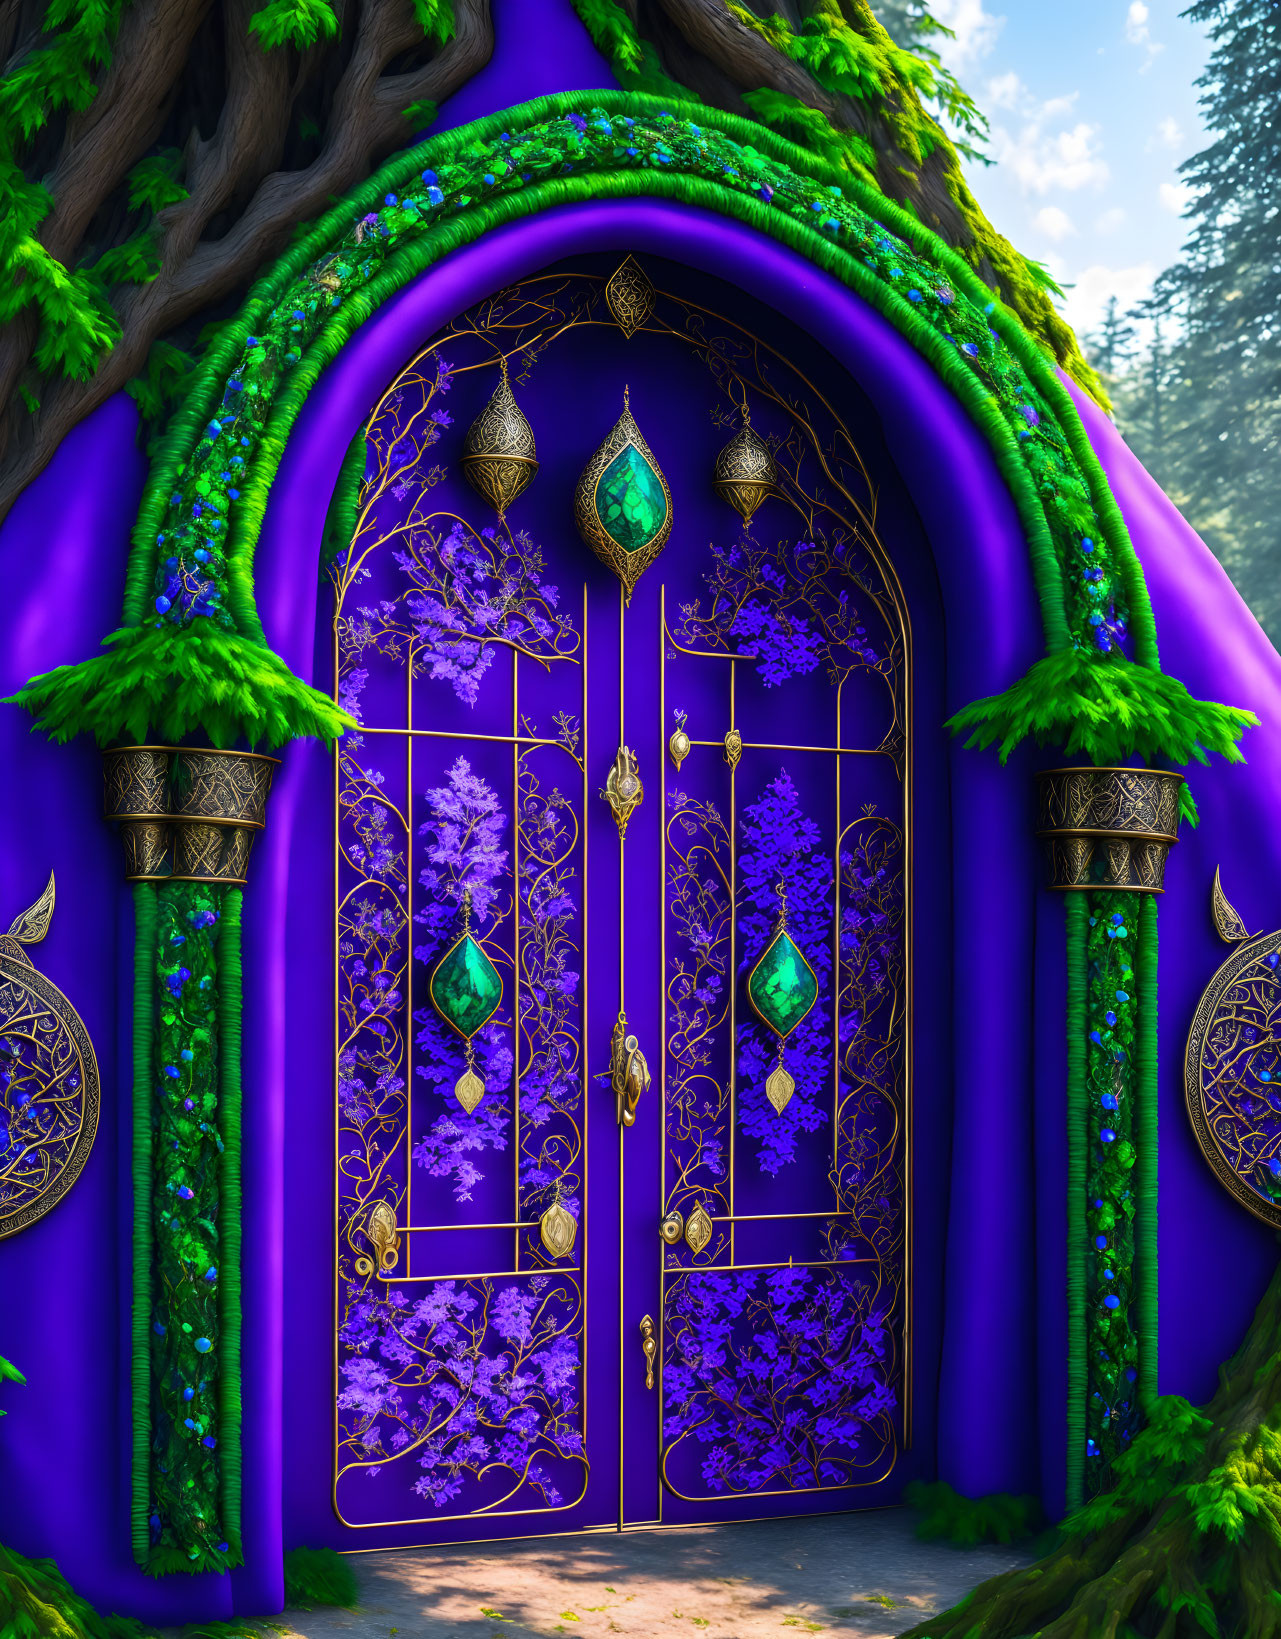 Purple fantasy door with golden patterns in mystical forest setting